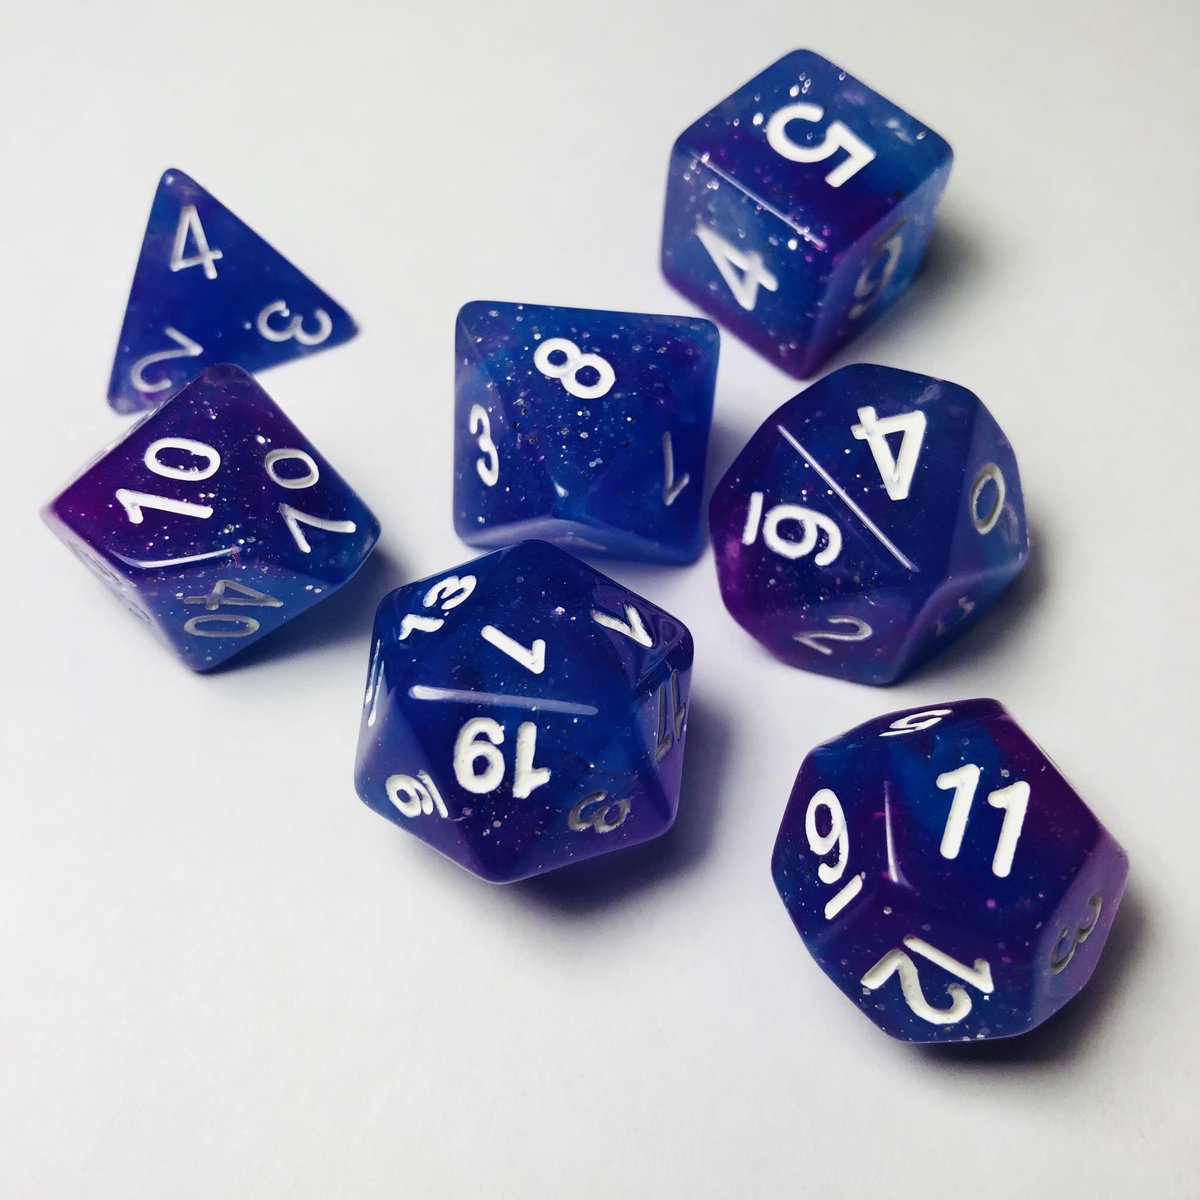 #DnD. group but I can’t resist buying dice setspic.twitter.com/beQnYXFy8H. 